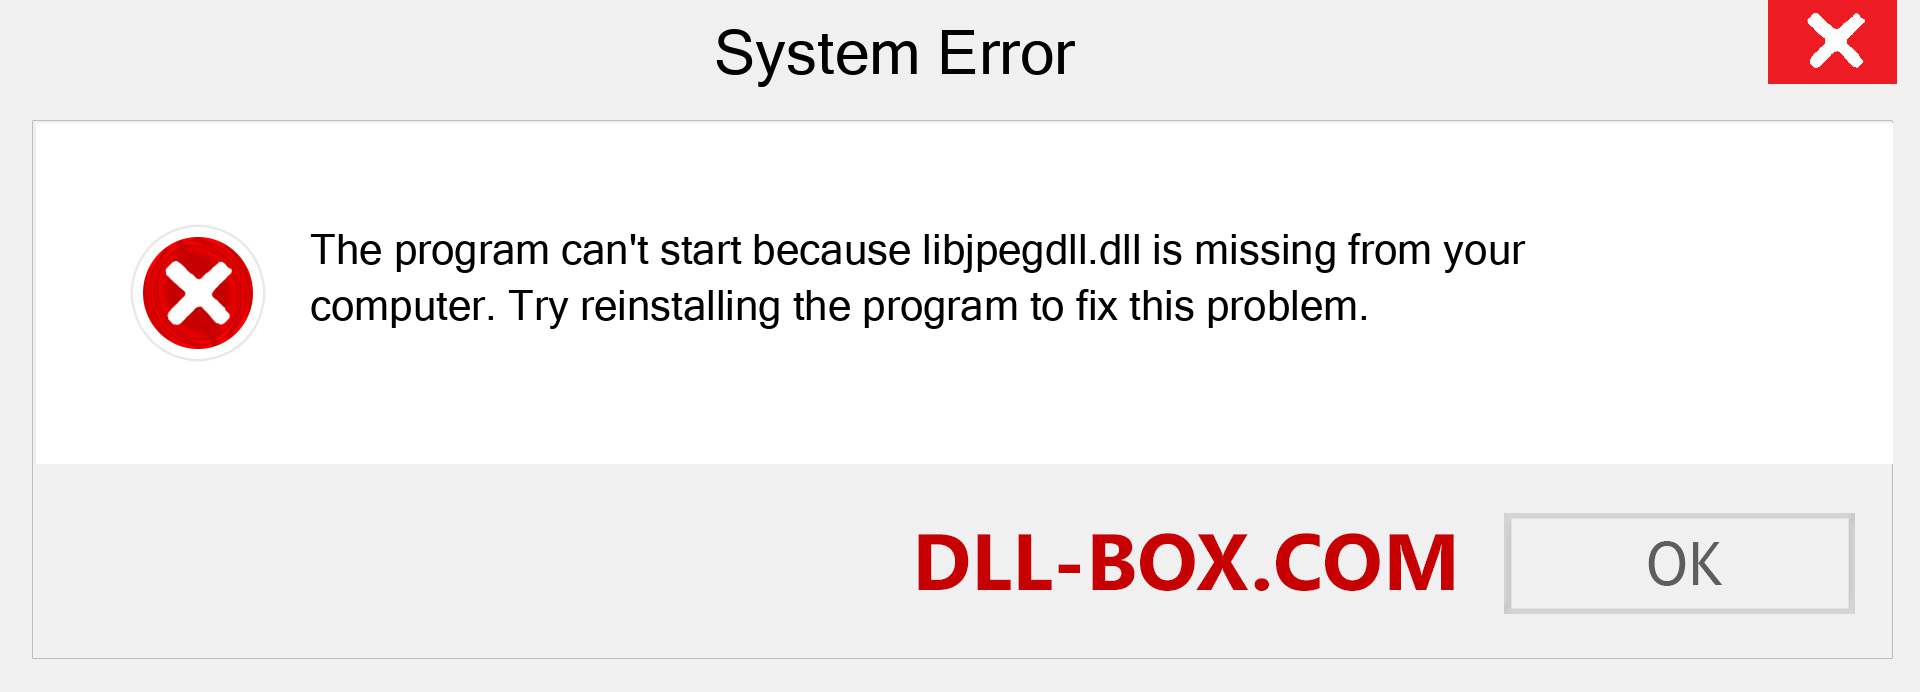  libjpegdll.dll file is missing?. Download for Windows 7, 8, 10 - Fix  libjpegdll dll Missing Error on Windows, photos, images